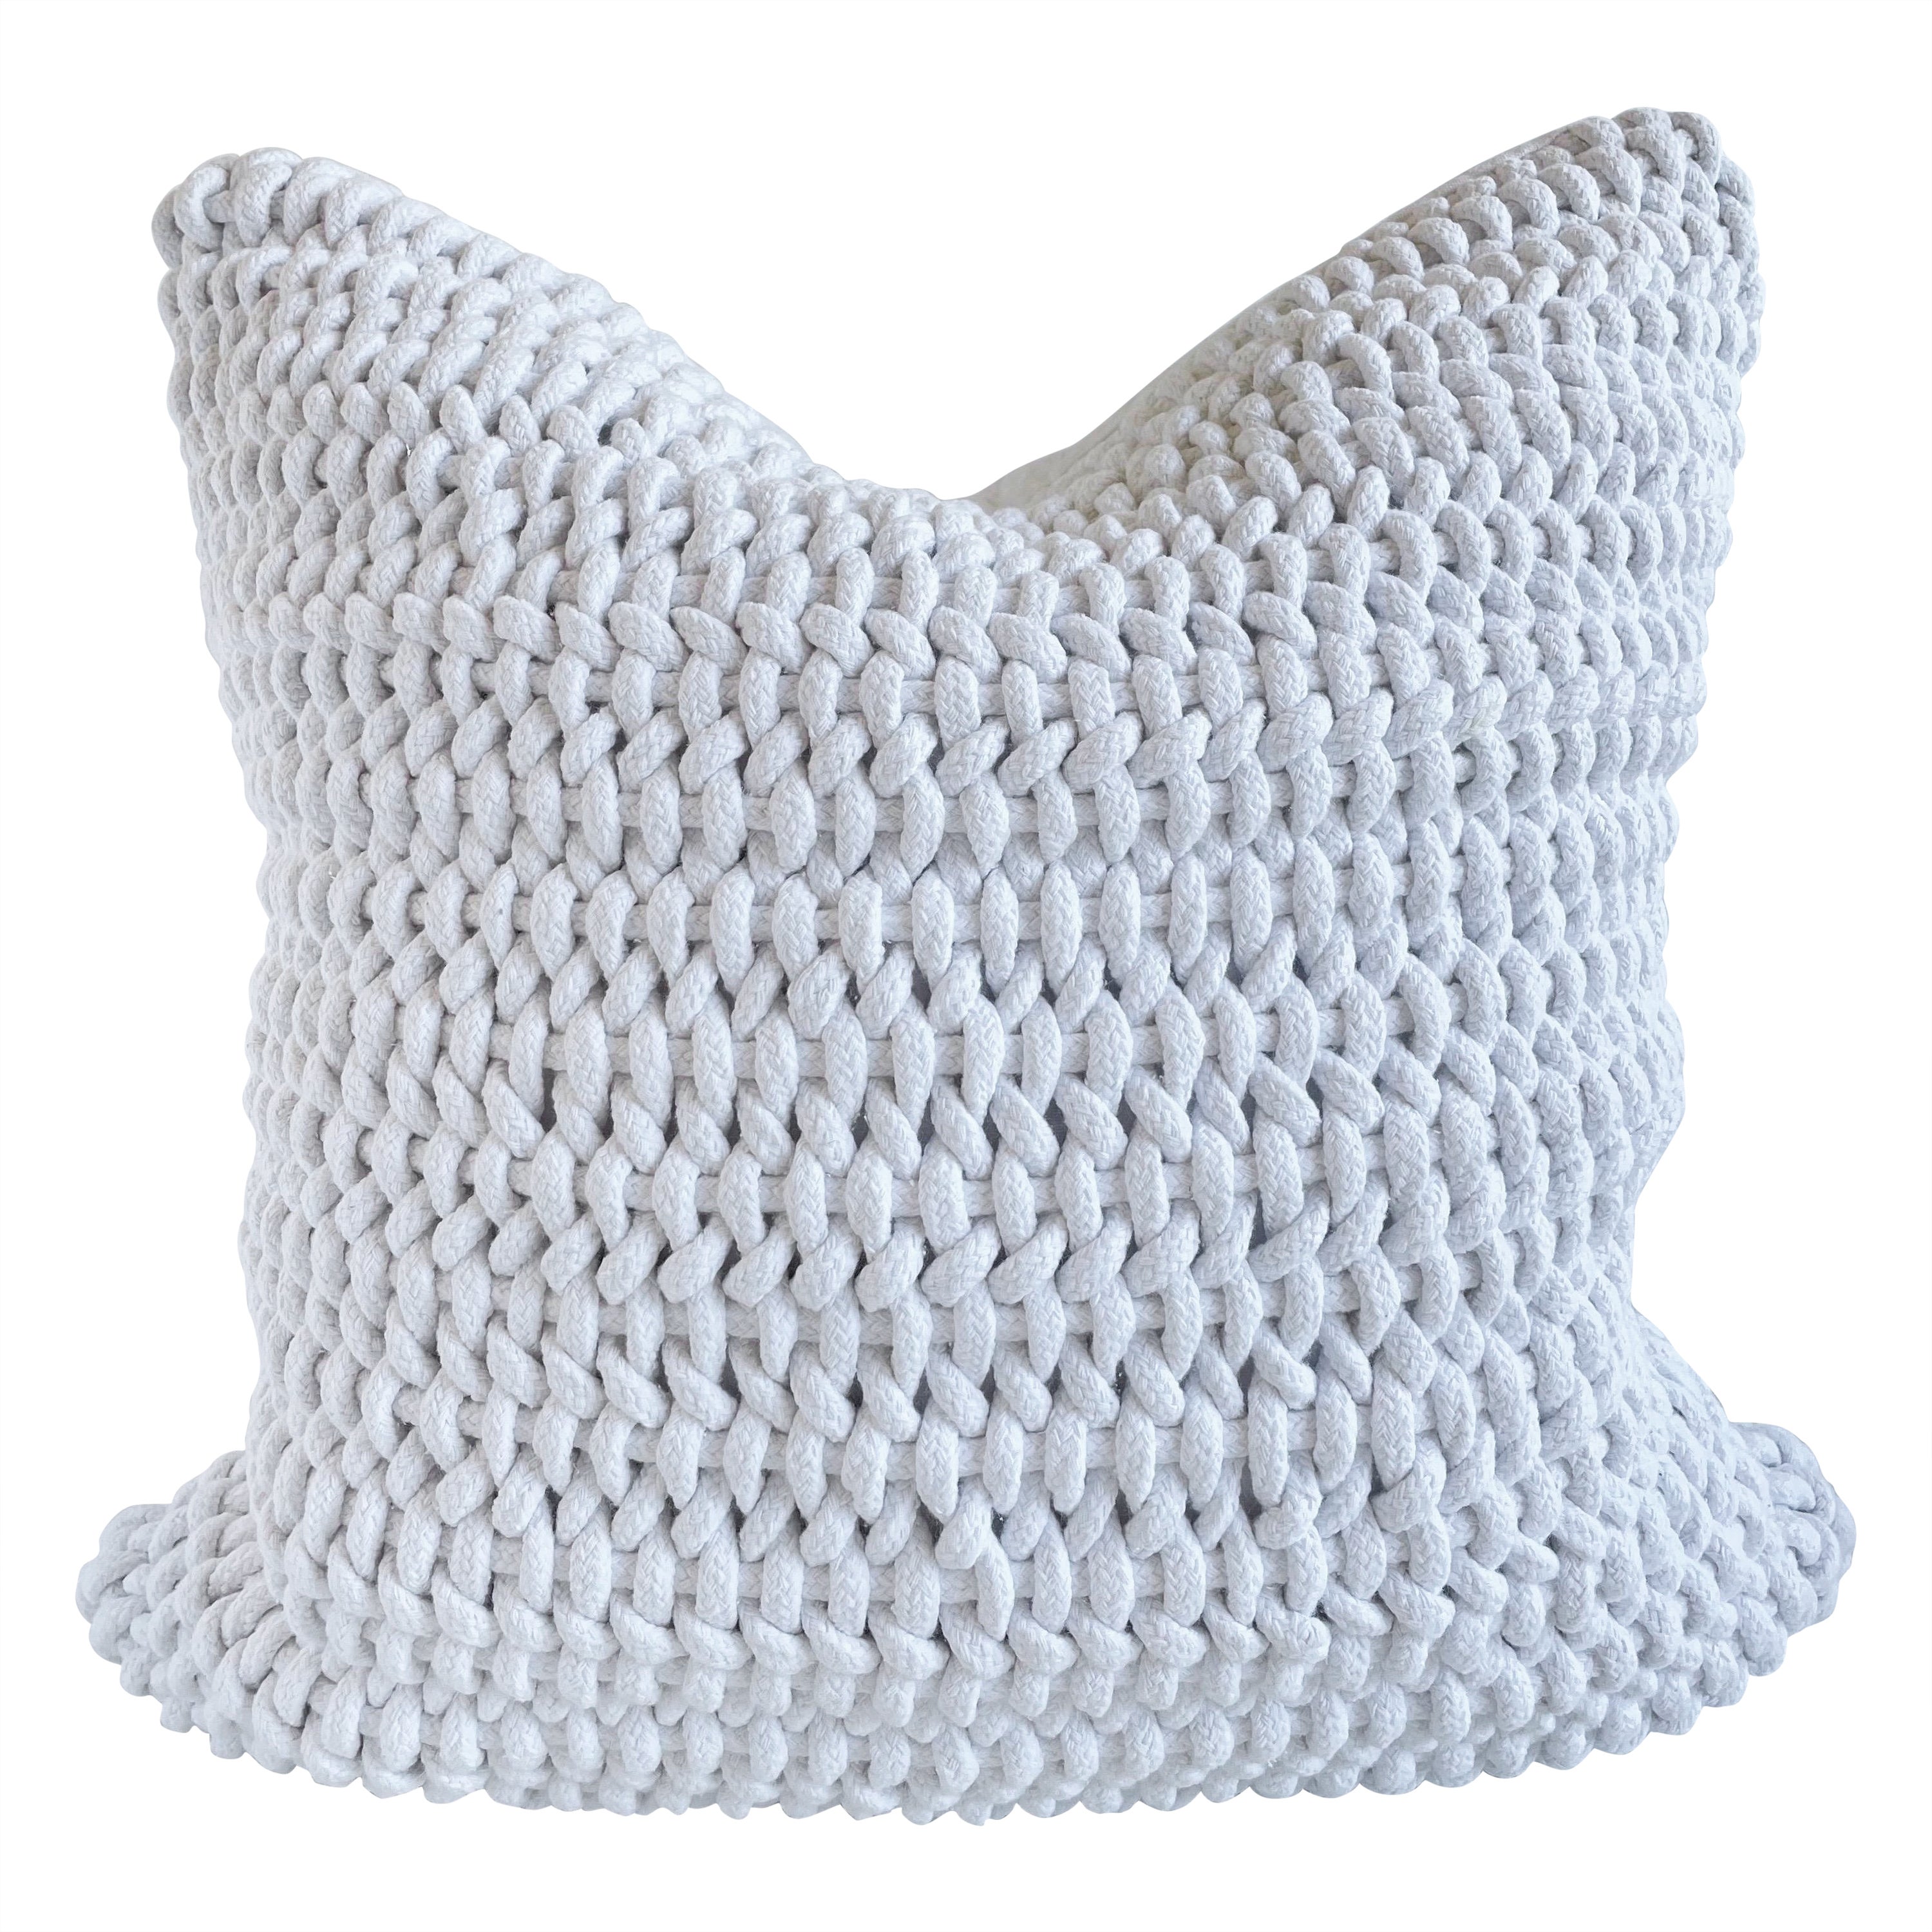 Woven Rope Cotton and Linen Pillow Cover For Sale